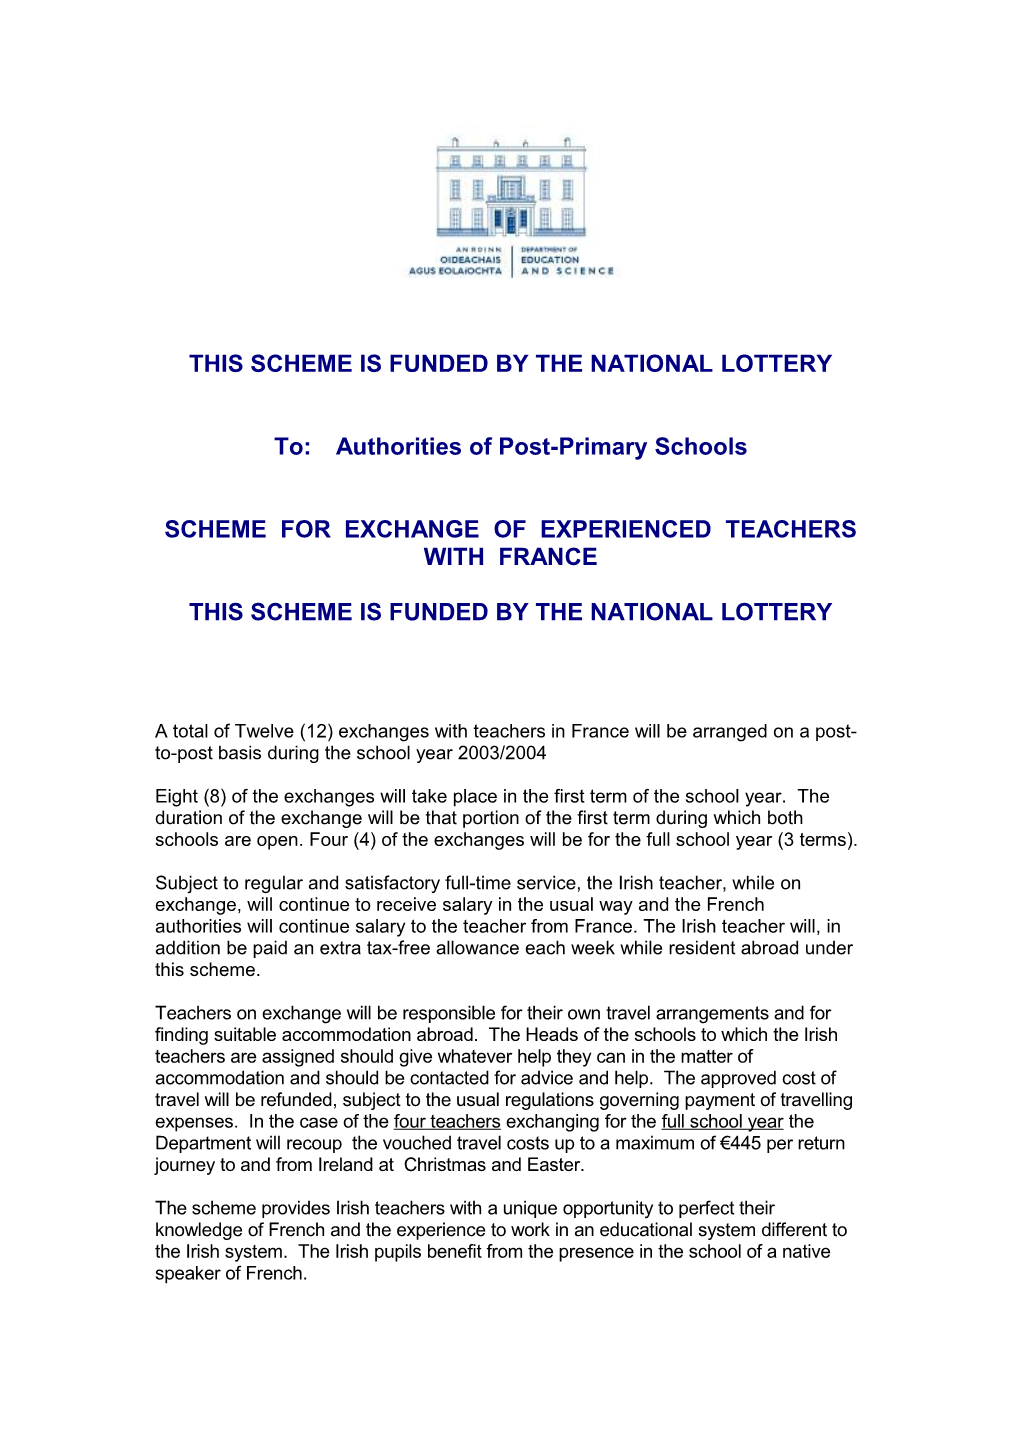 Scheme for Exchange of Experienced Teachers with France/Germany (File Format Word 119KB)